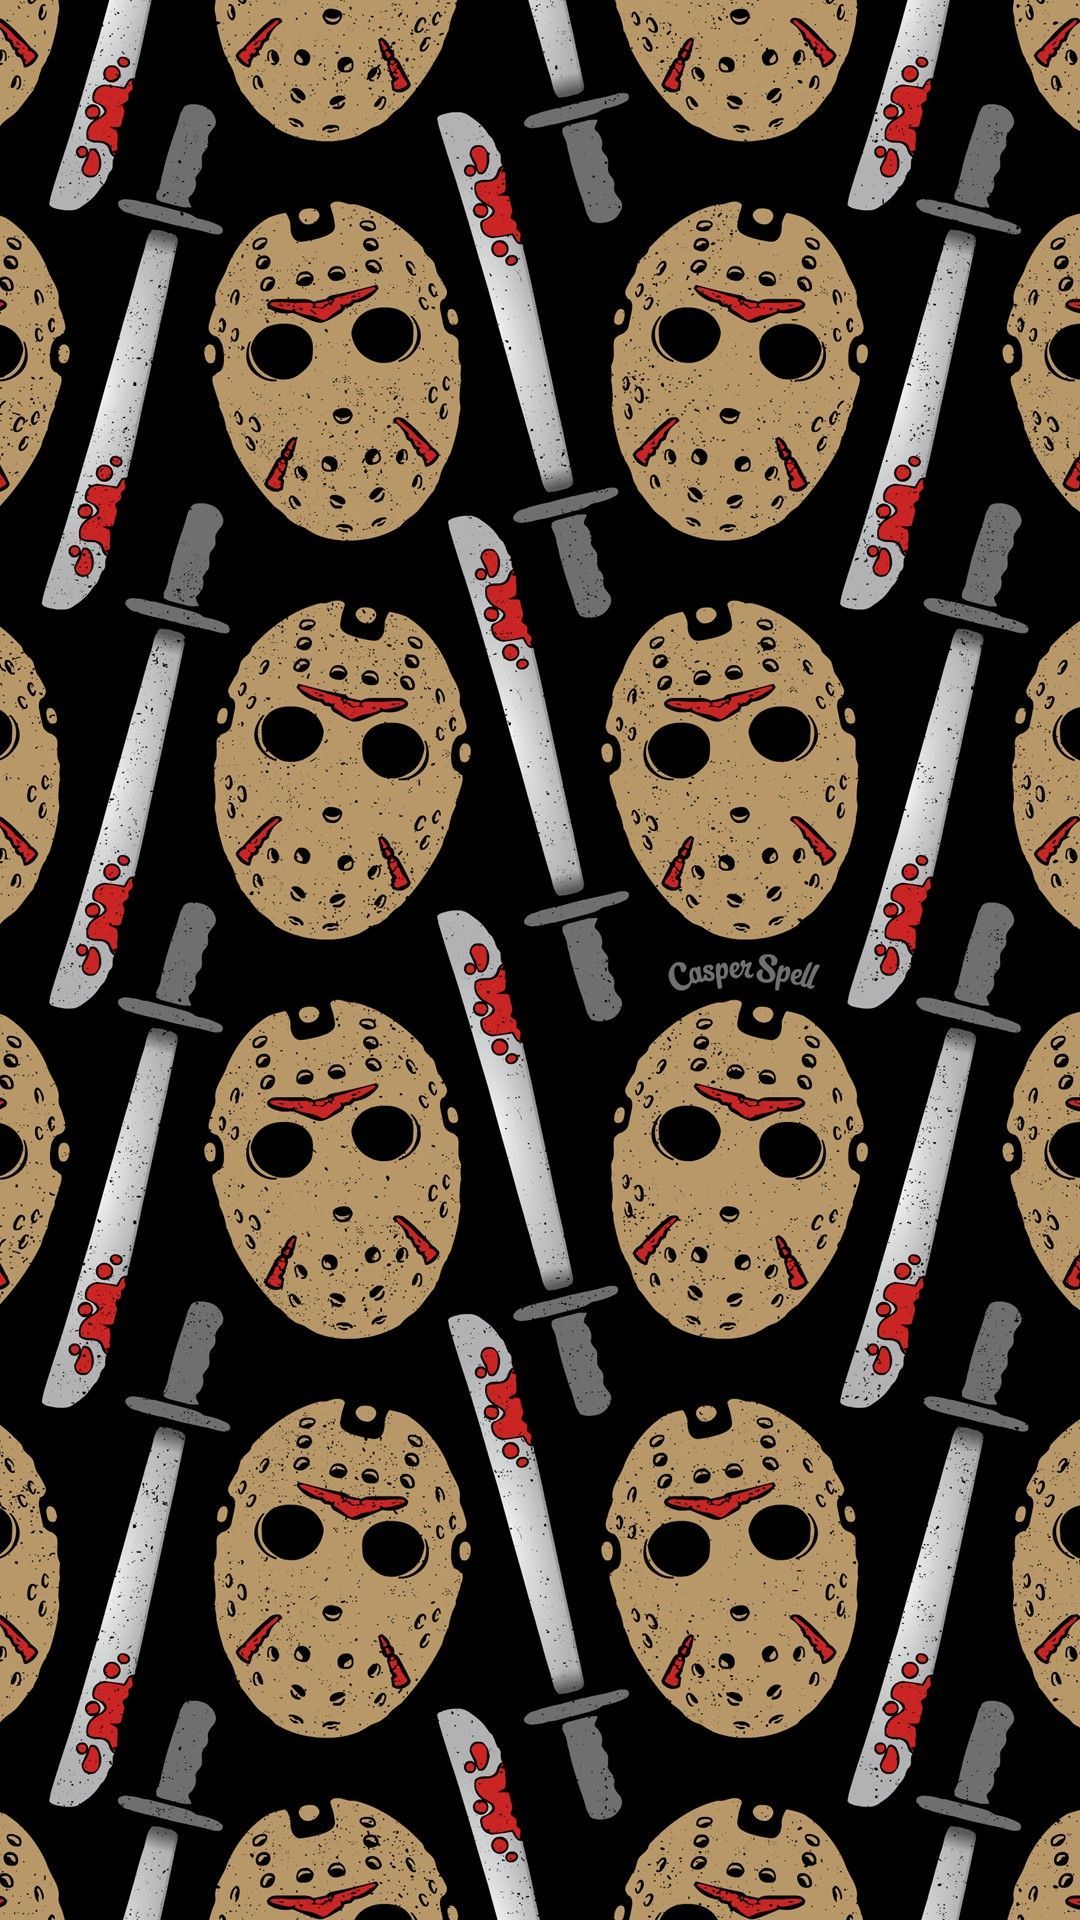 Friday the 13th Jason Voorhees repeat pattern art surface design